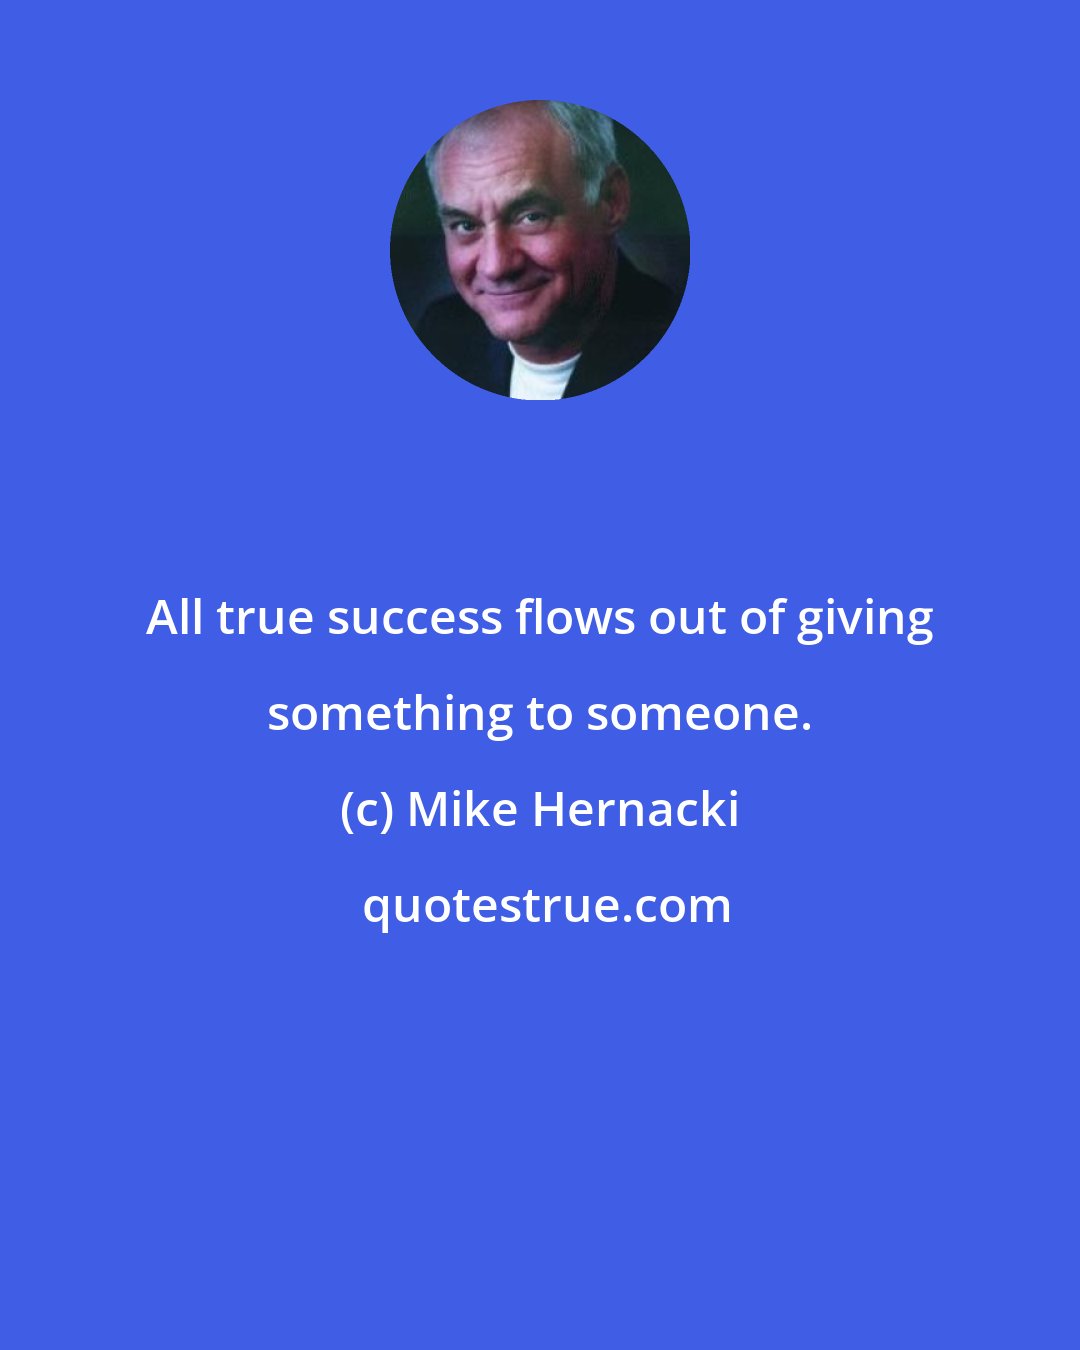 Mike Hernacki: All true success flows out of giving something to someone.